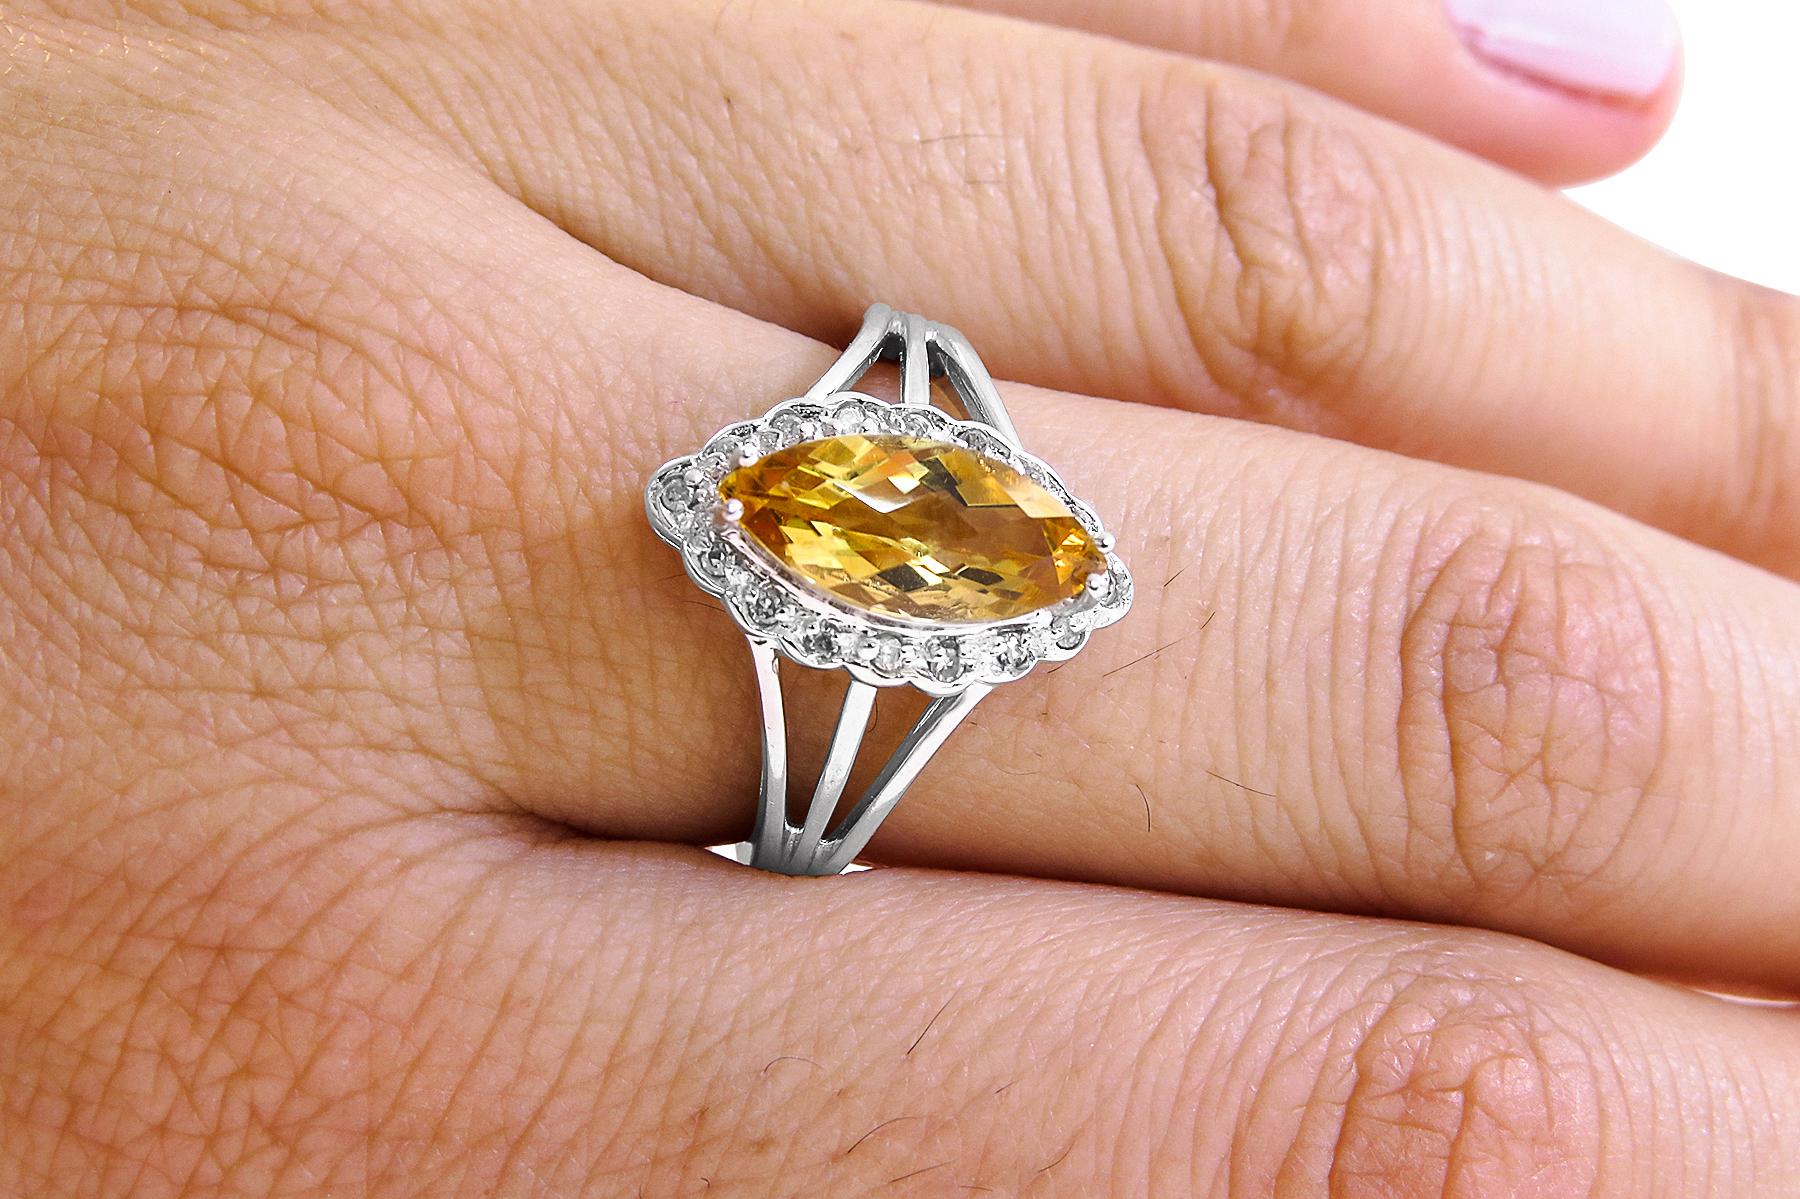 14k White Gold
Weight= 3.6gr 
Size= 7 
Diamond= 0.15 ct total 
Topaz= 2 ct  total
